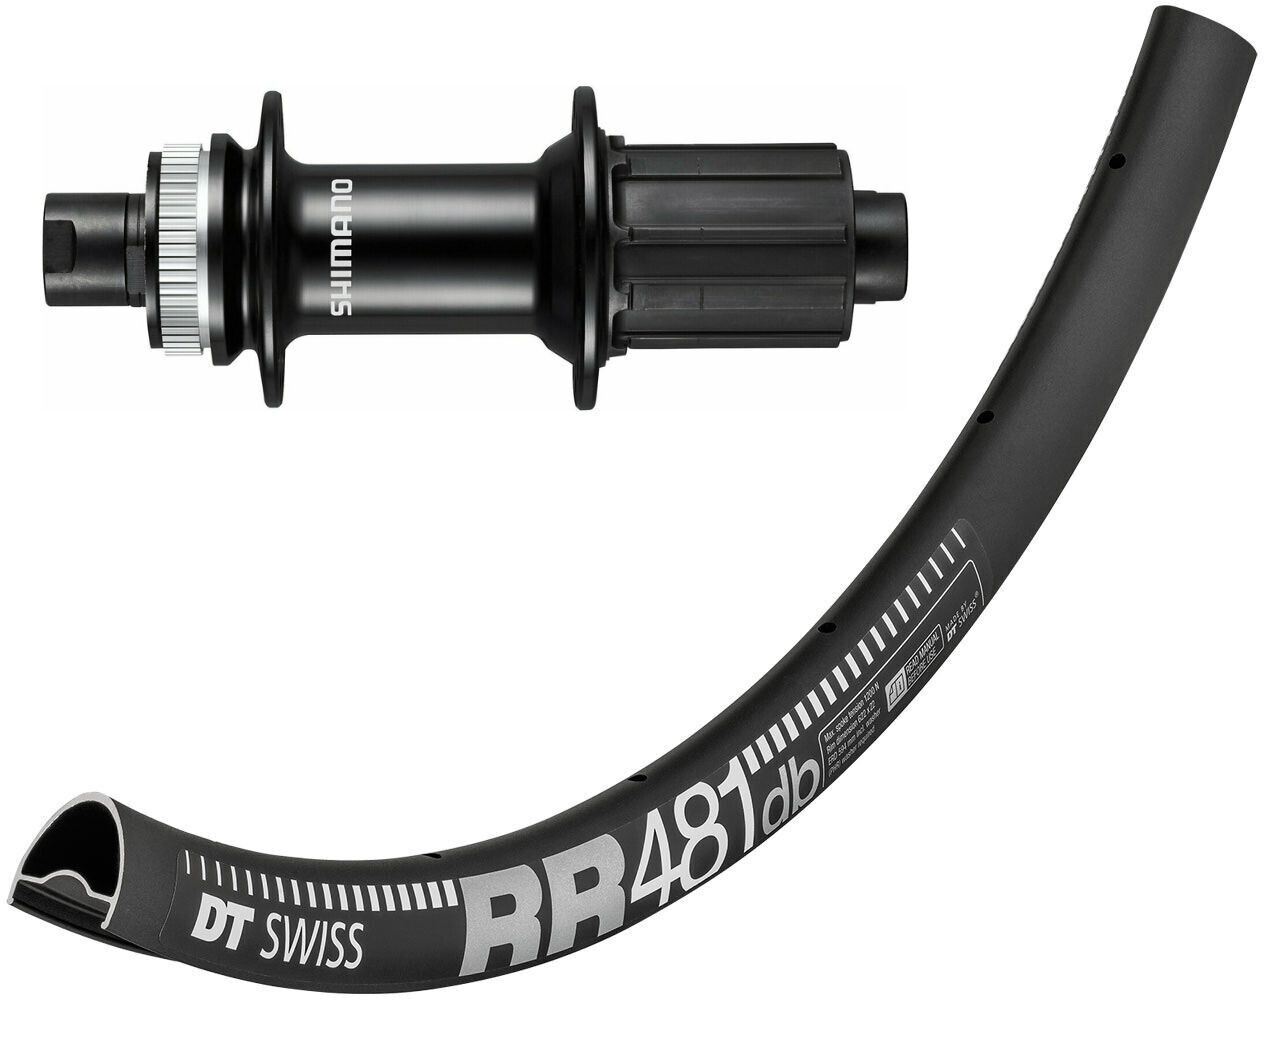 DT Swiss RR 481 700c rim with Shimano RS470 hubs. For disc brake and 12mm thru-axle.